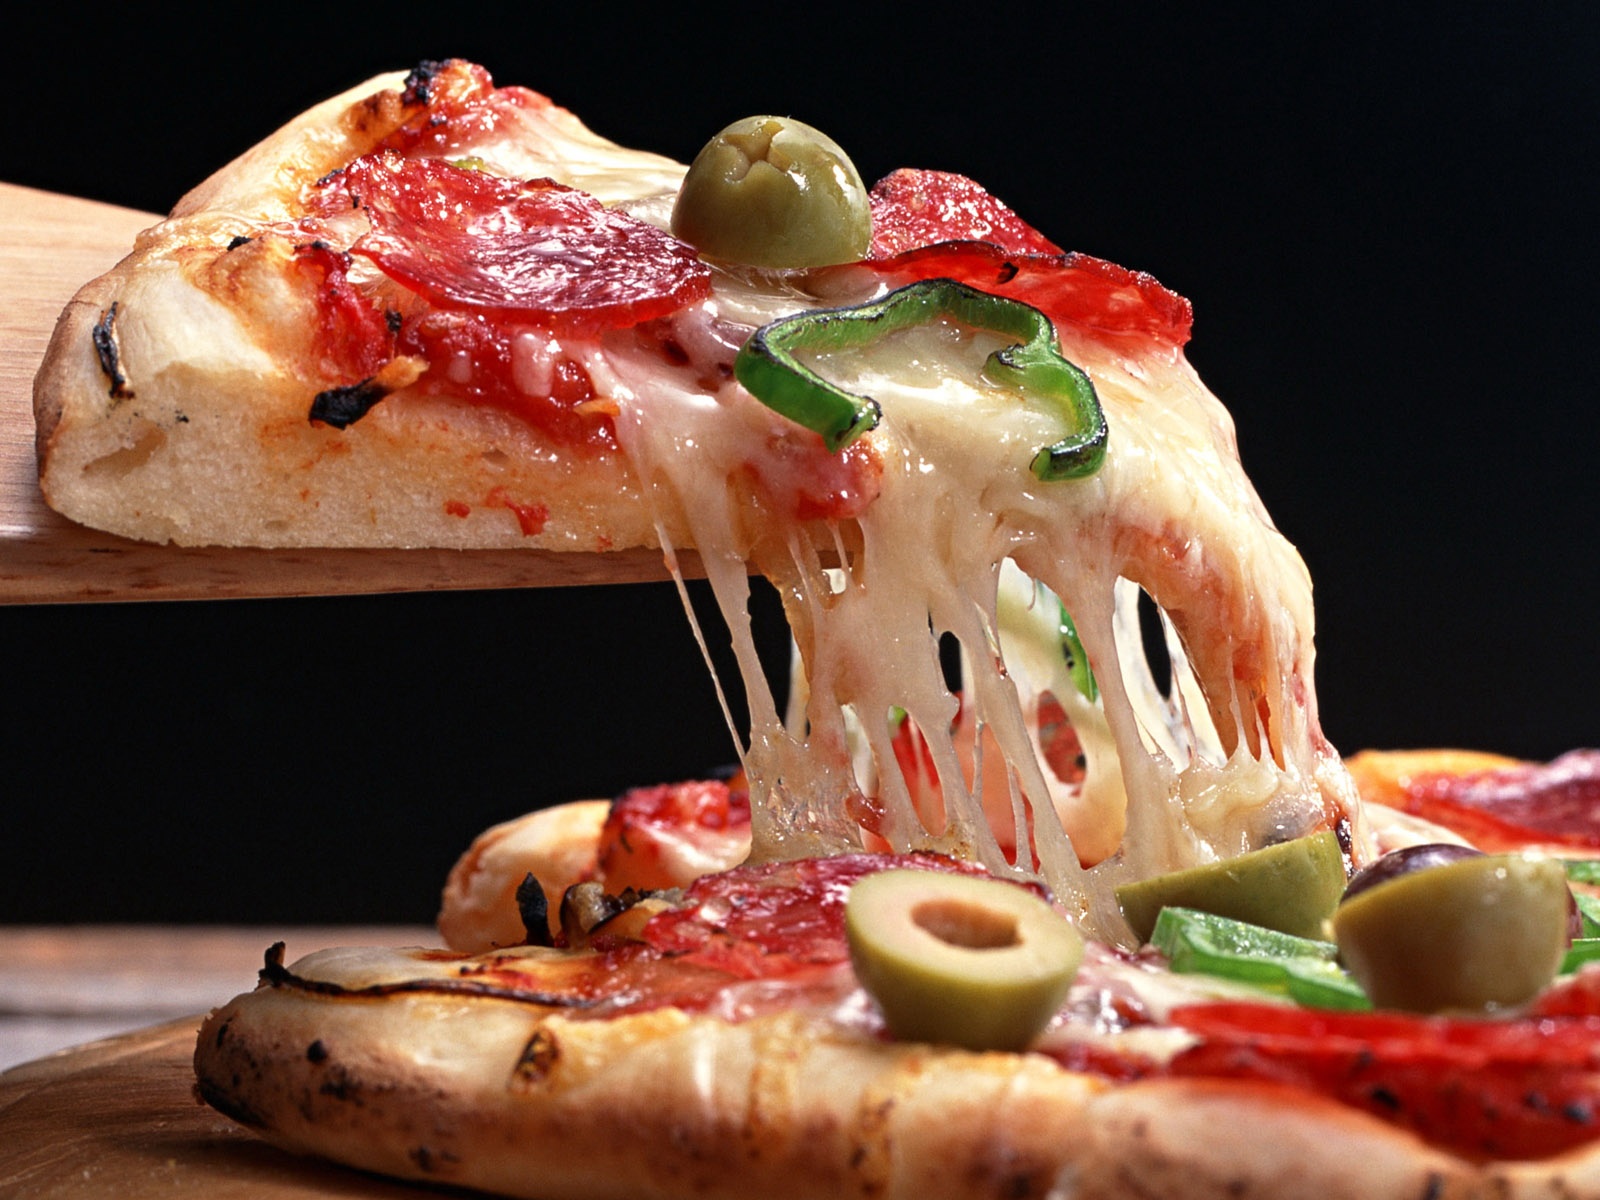 Delicious slice of pizza topped with mouthwatering ingredients.